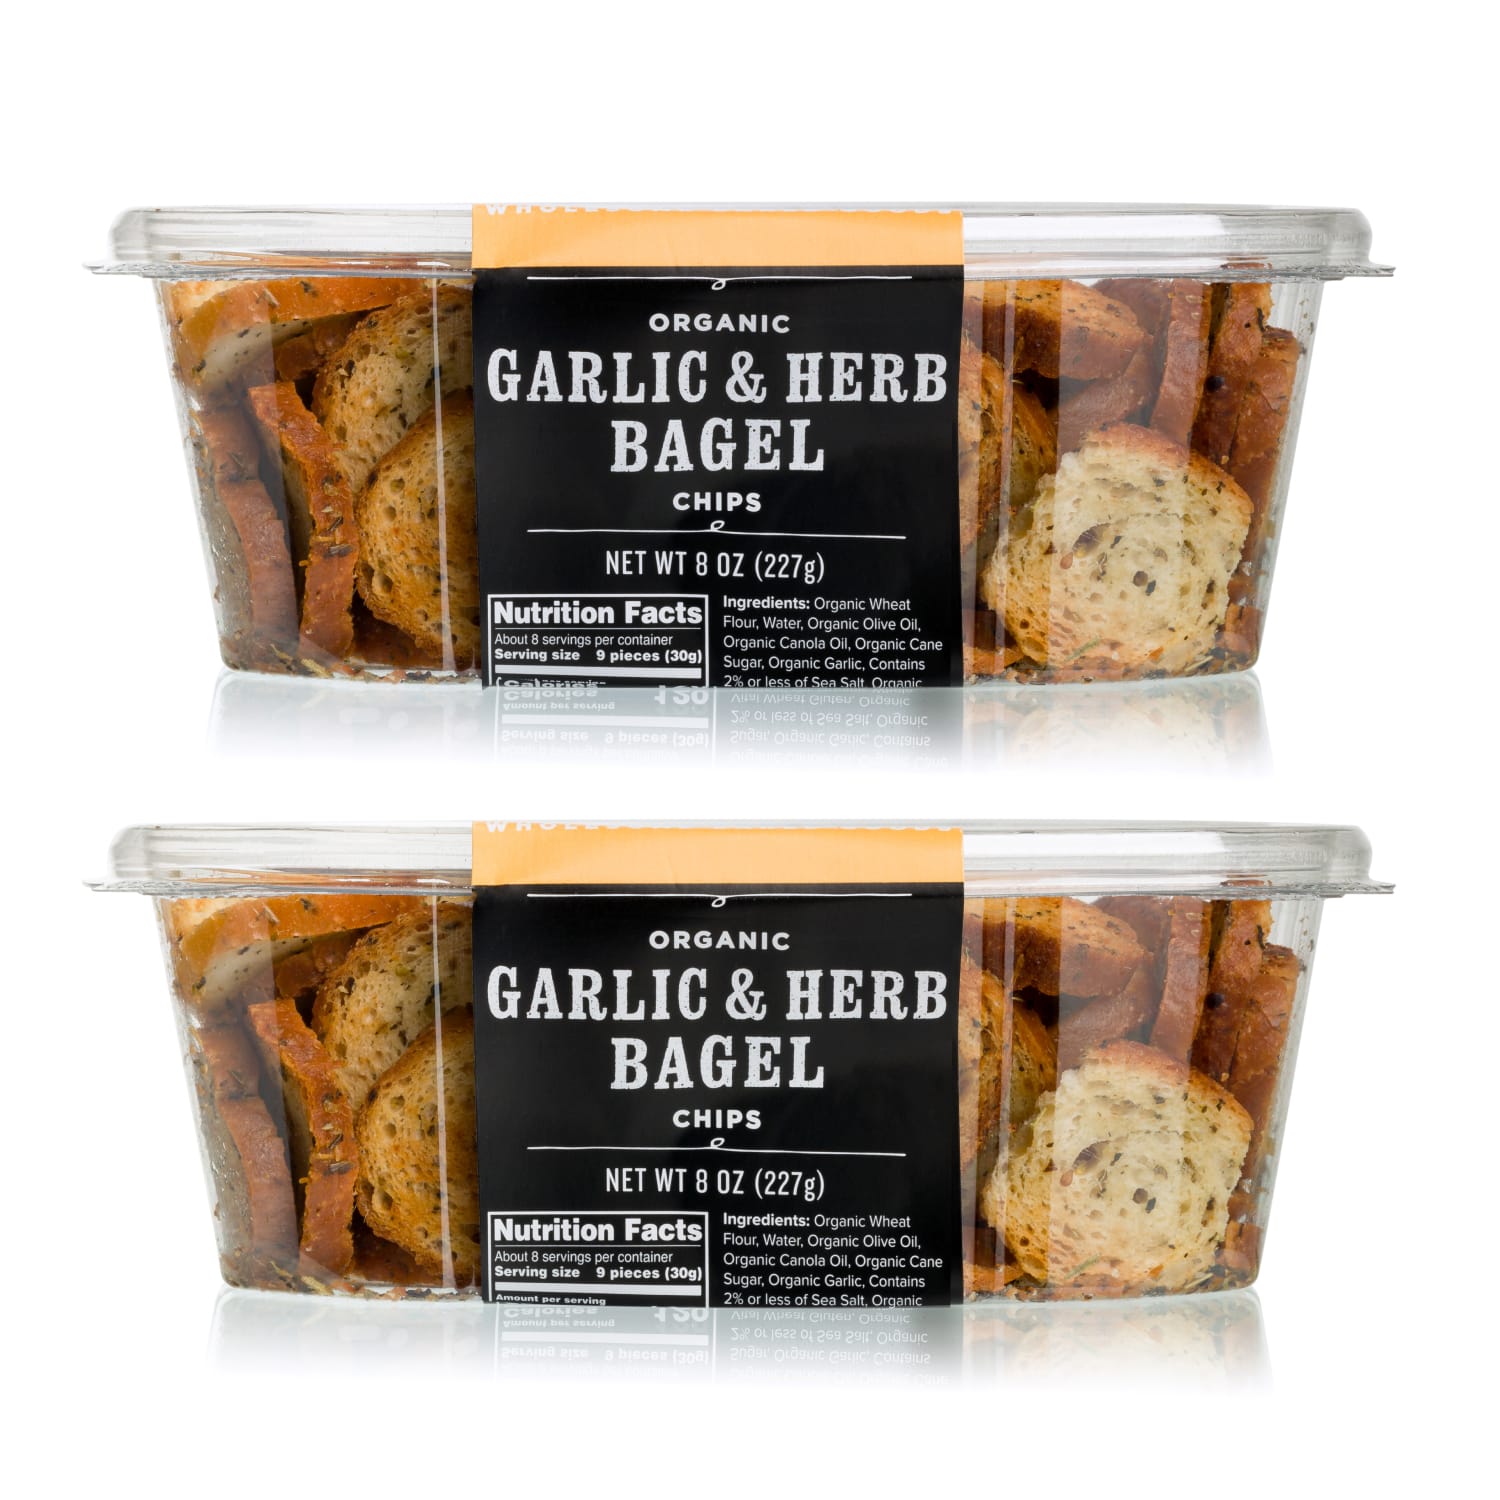 two Garlic & Herb Bagel Chips containers from the side